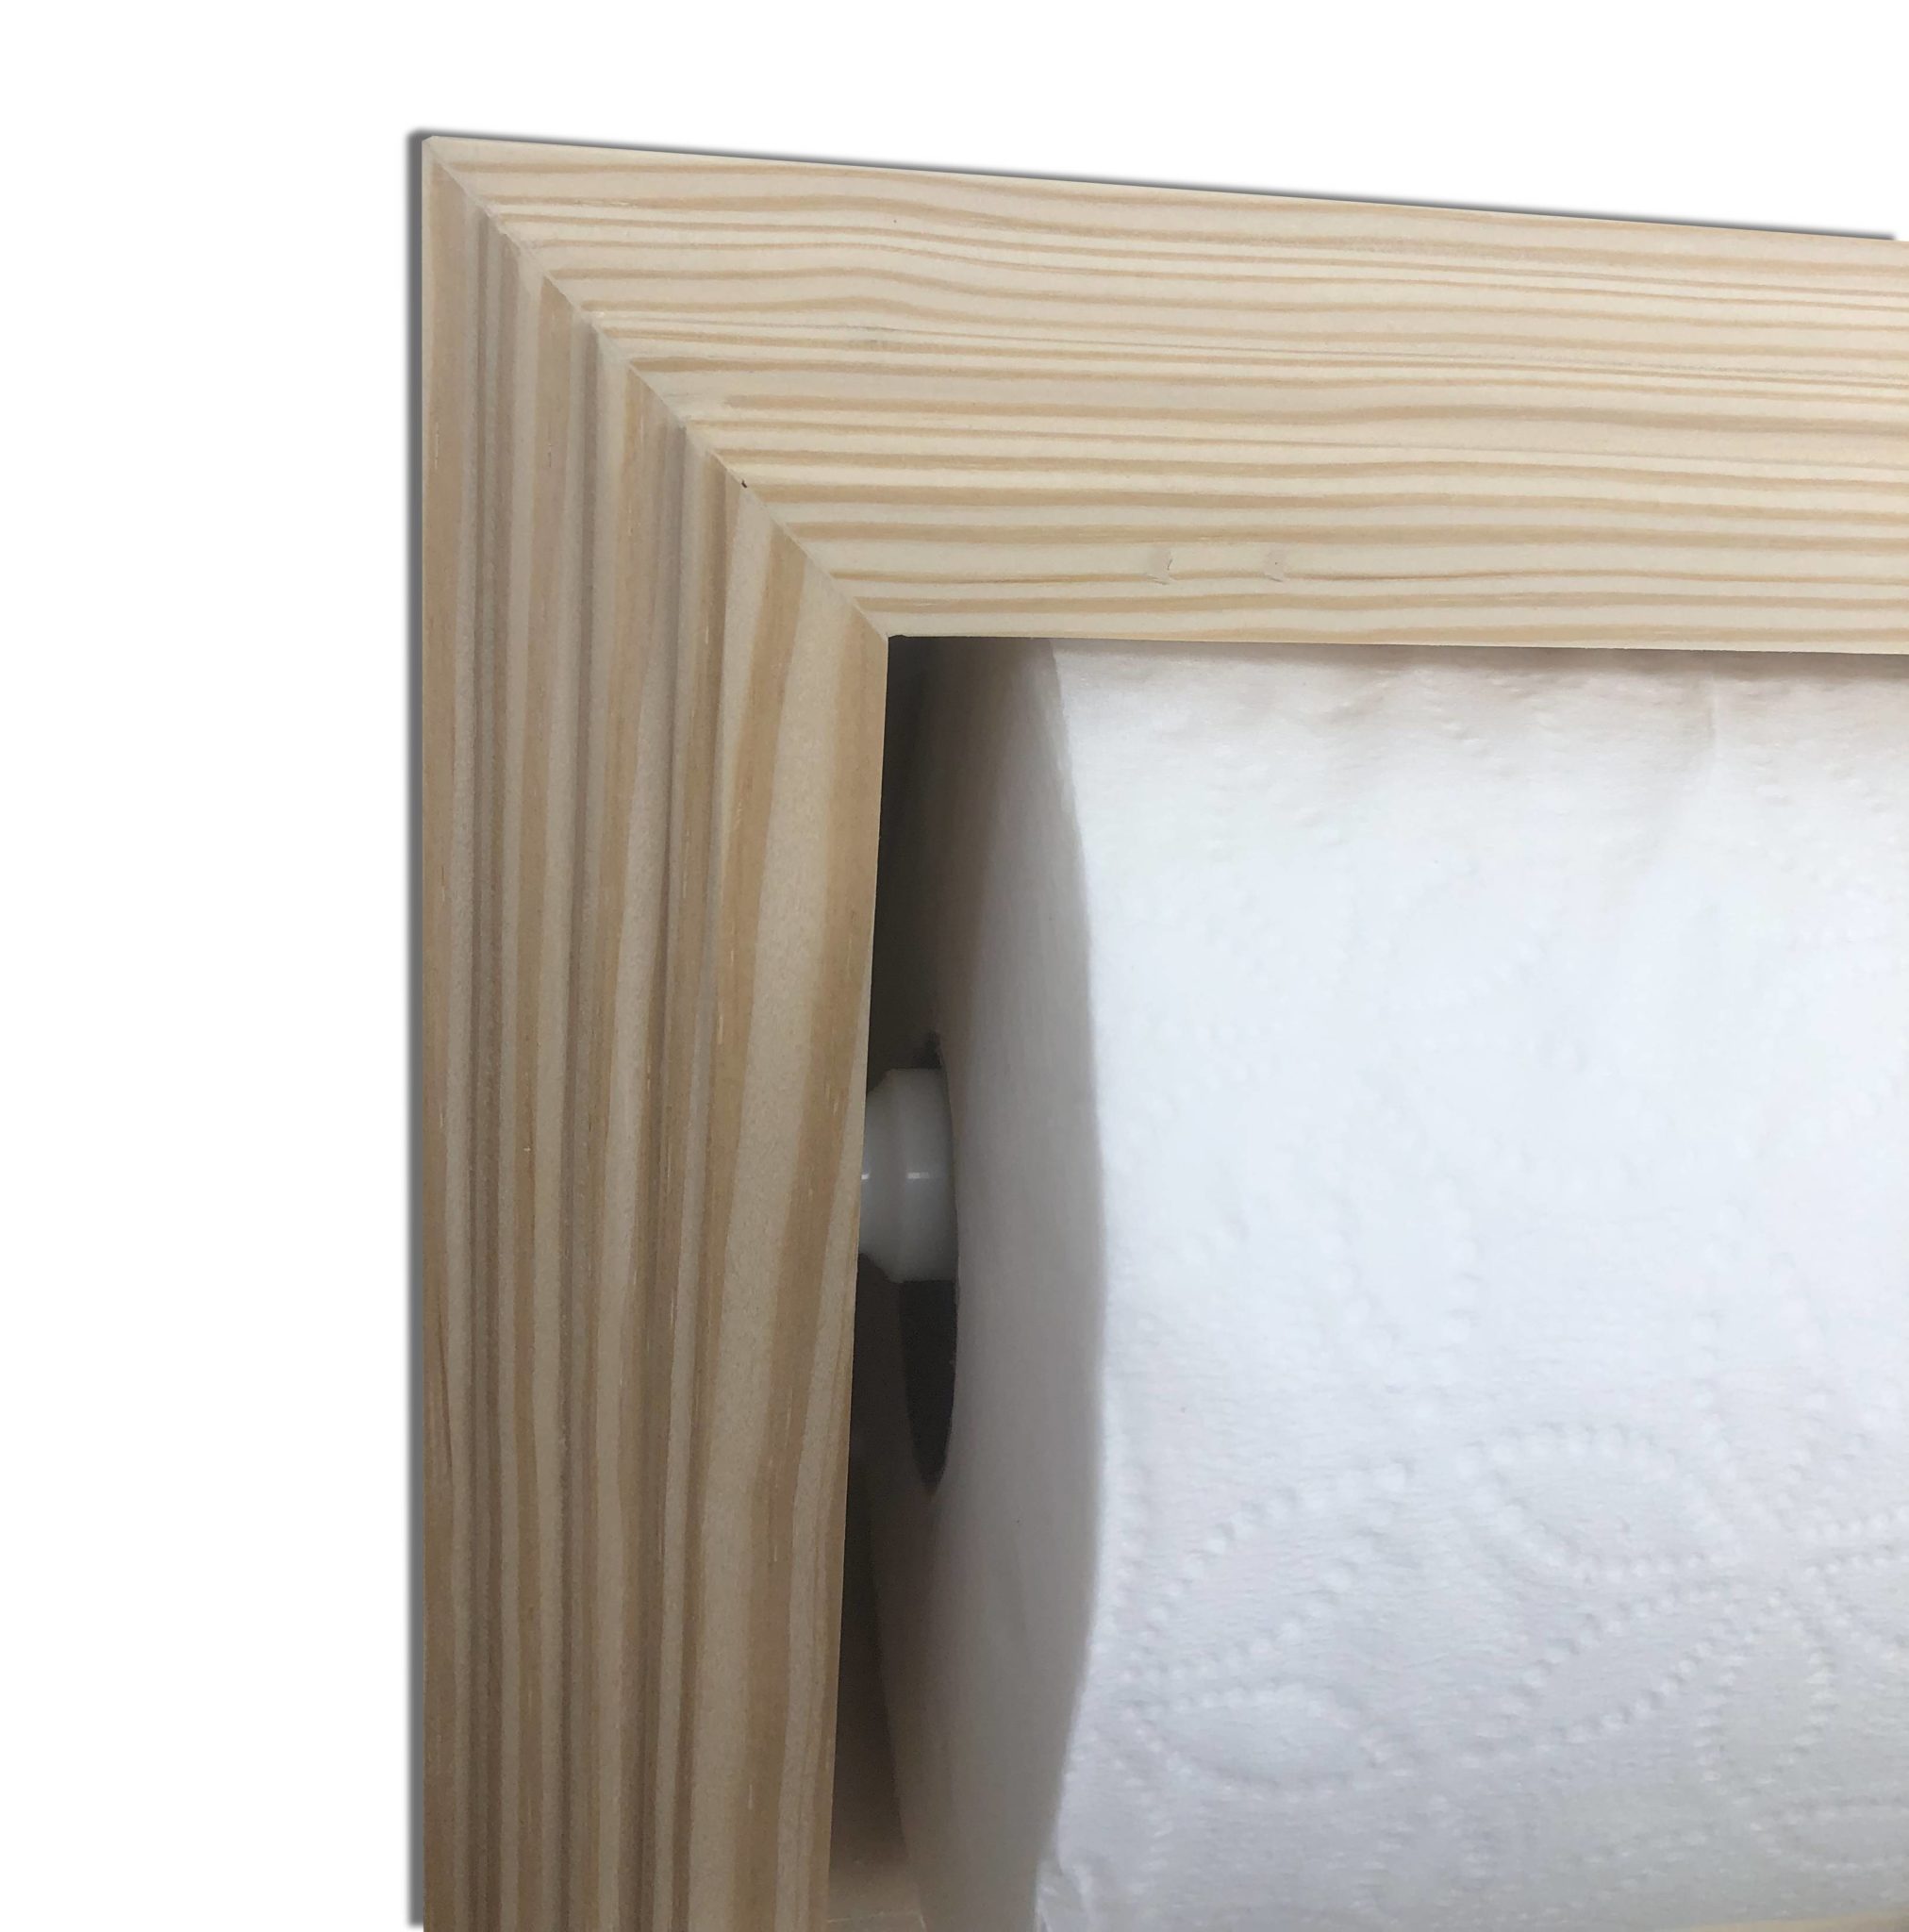 Highlands Double Toilet Paper Holder with Storage Cubby